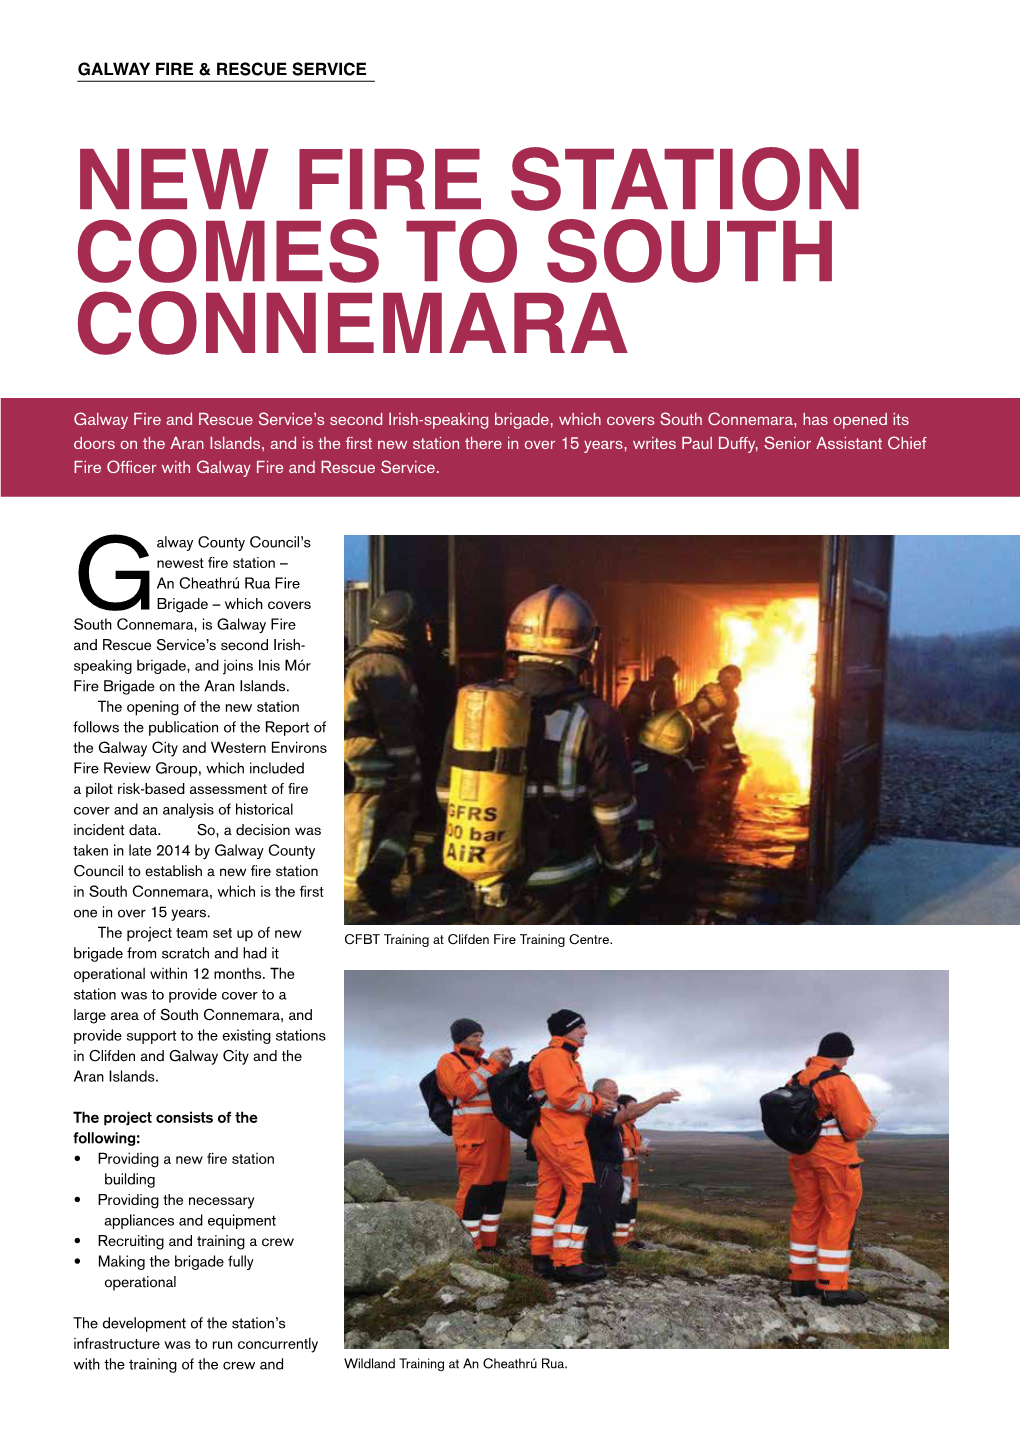 New Fire Station Comes to South Connemara